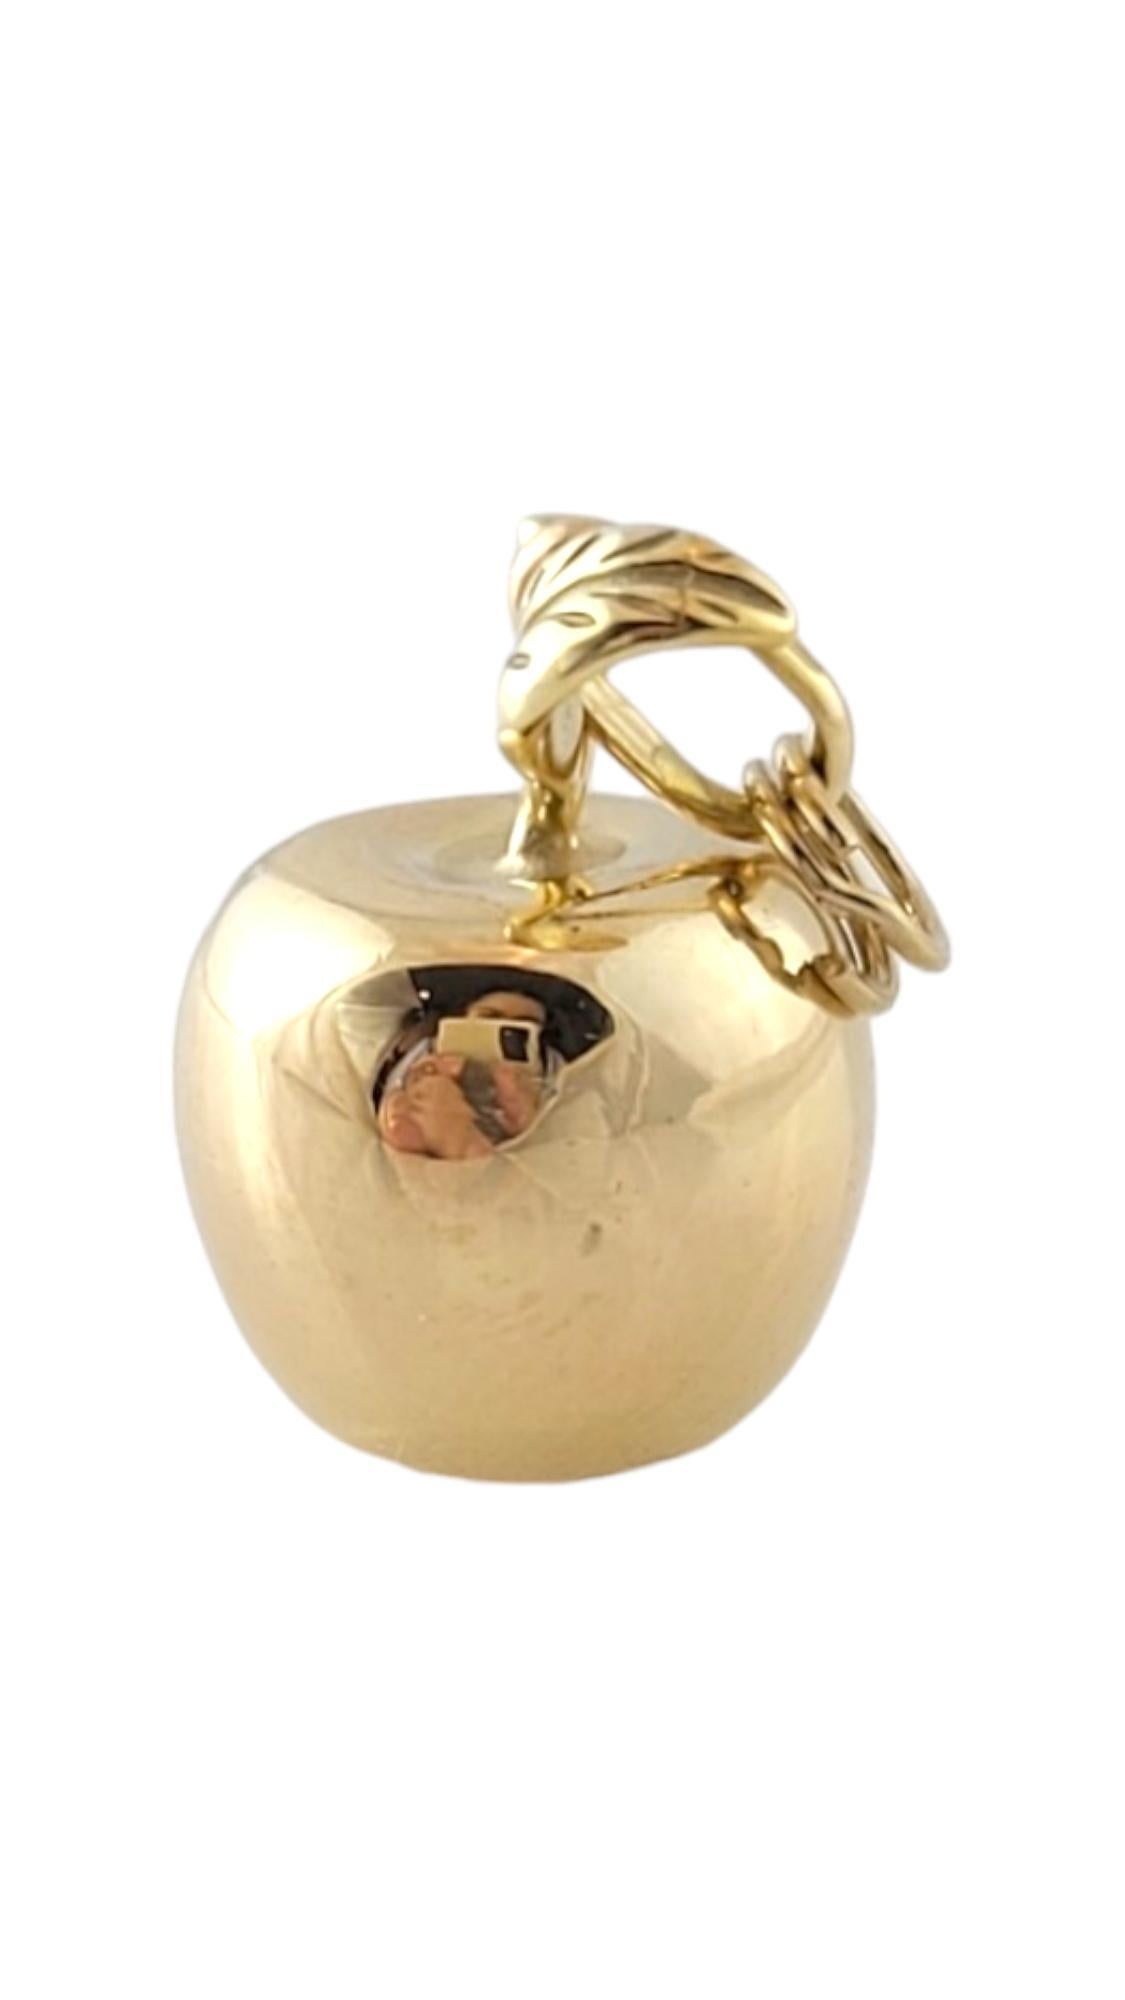 14K Yellow Gold Apple Charm

Lovely apple charm with stem and leaf in 14K yellow gold.

Hallmark: 14K ITALY

Weight: 1.23 dwt./ 1.91 g

Length w/ bail: 24.15 mm

Size: 16.6 mm X 12.0 mm X 12.0 mm

Very good condition, professionally polished.

Will